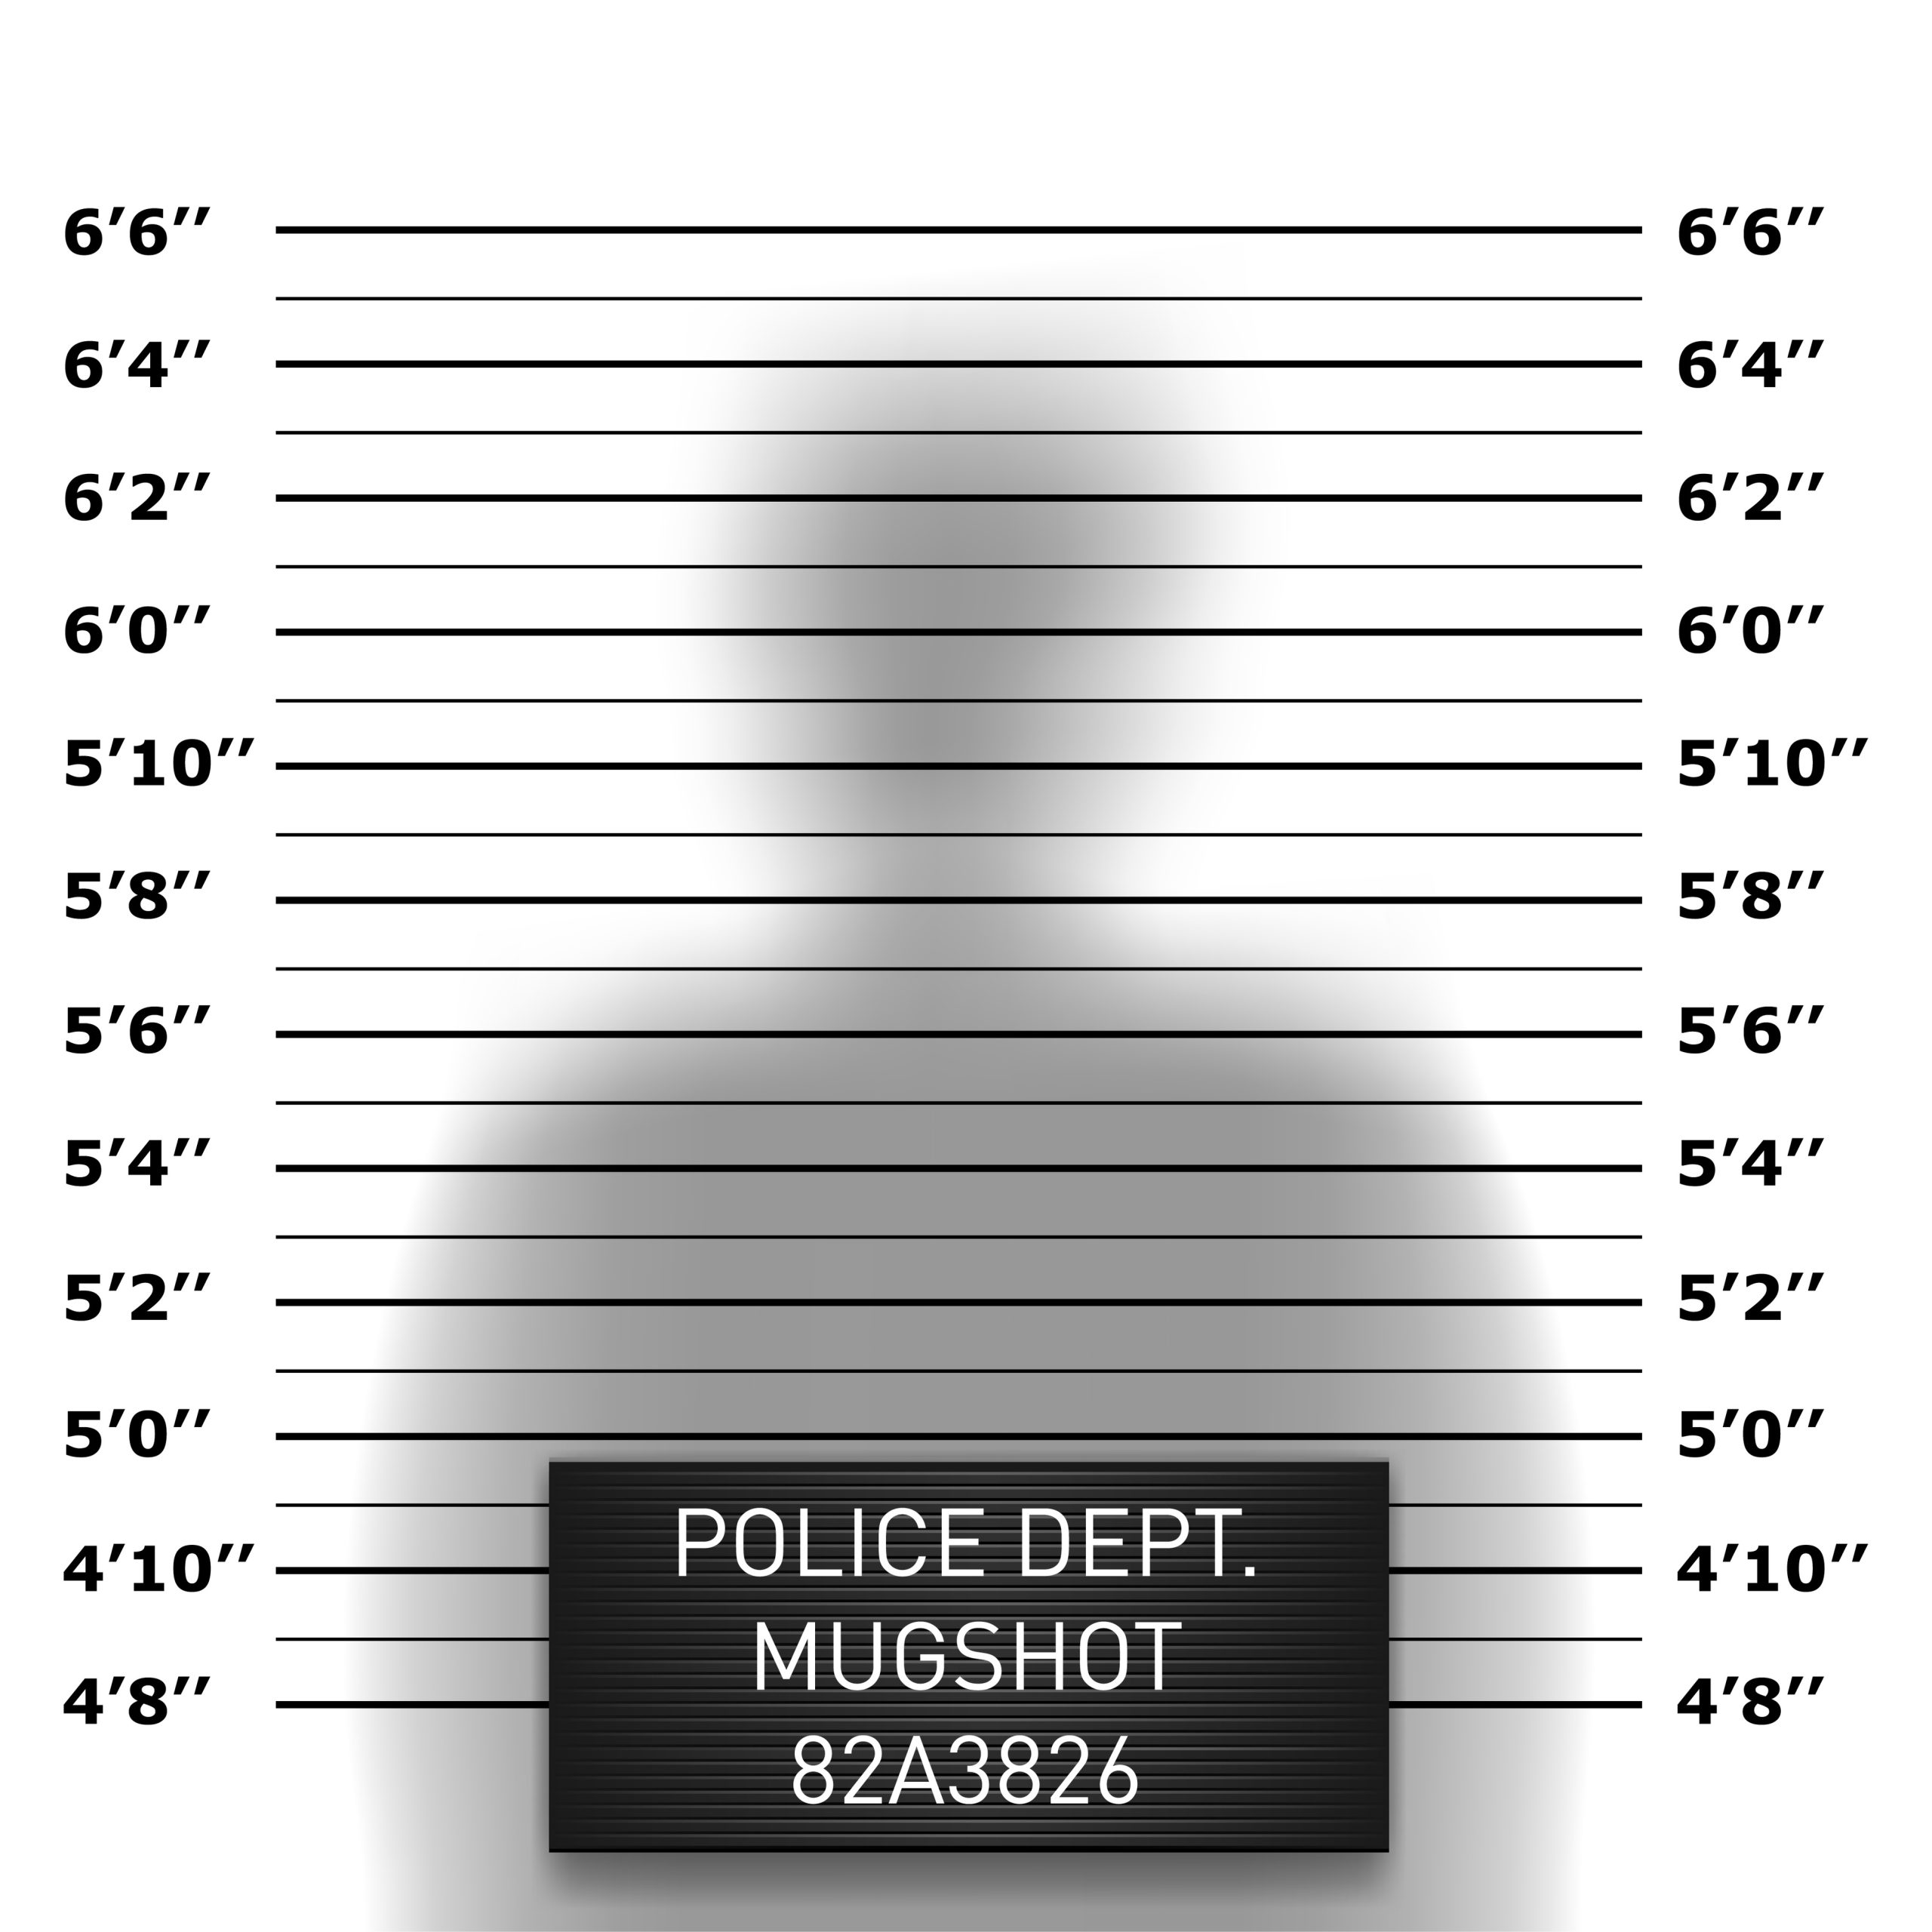 Are You Picture Perfect? AB 994 and Posting Mugshots on Law